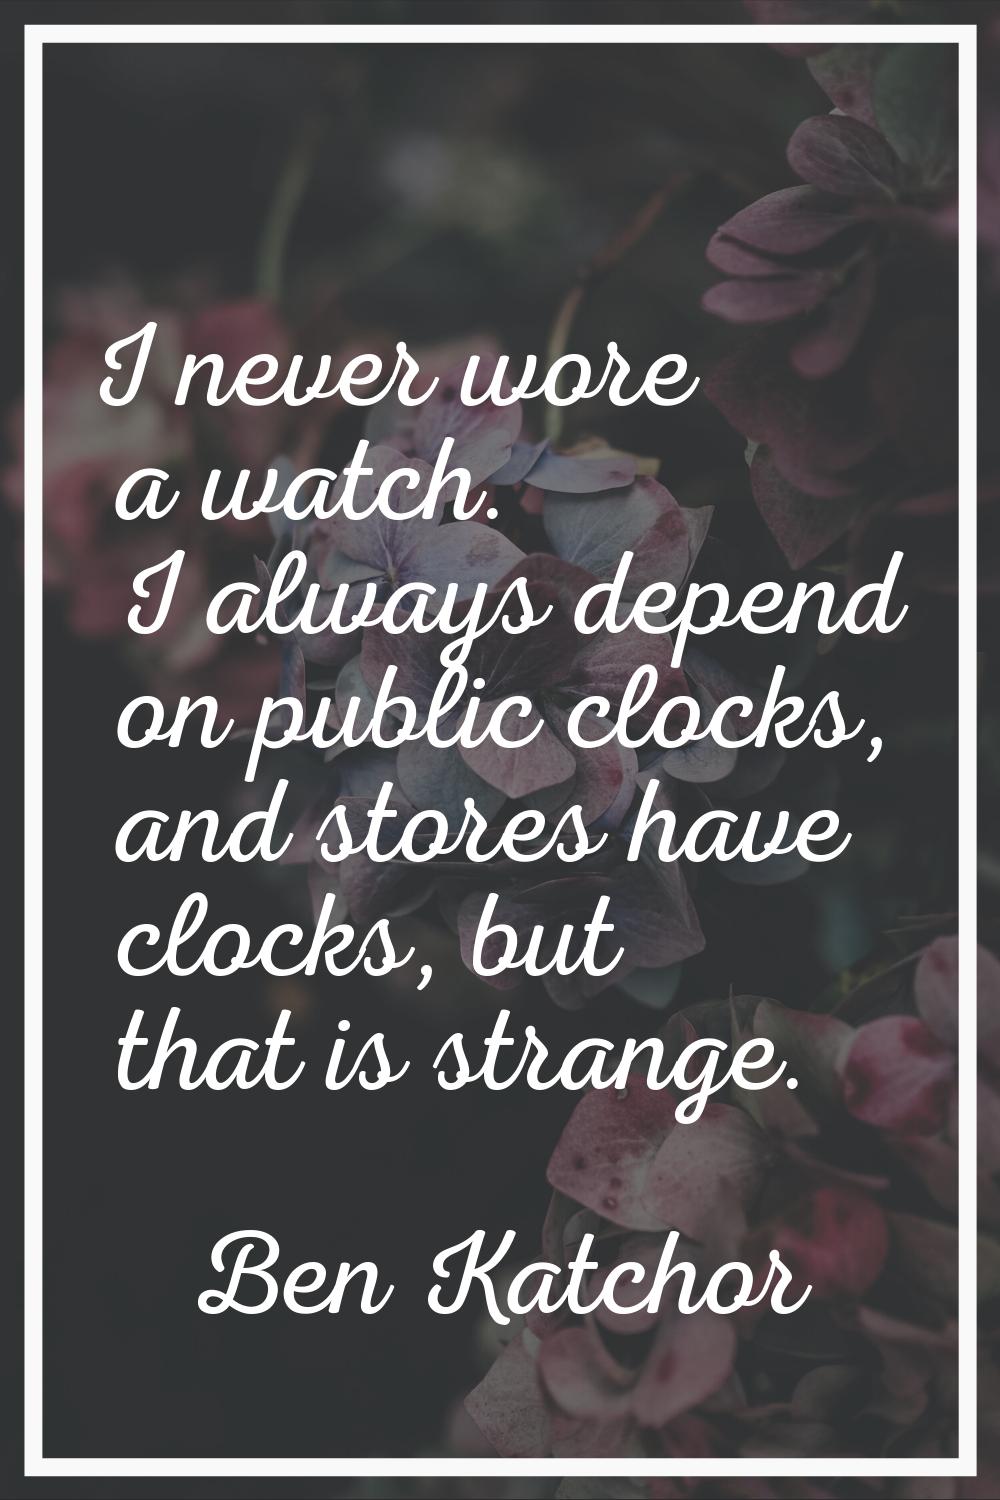 I never wore a watch. I always depend on public clocks, and stores have clocks, but that is strange